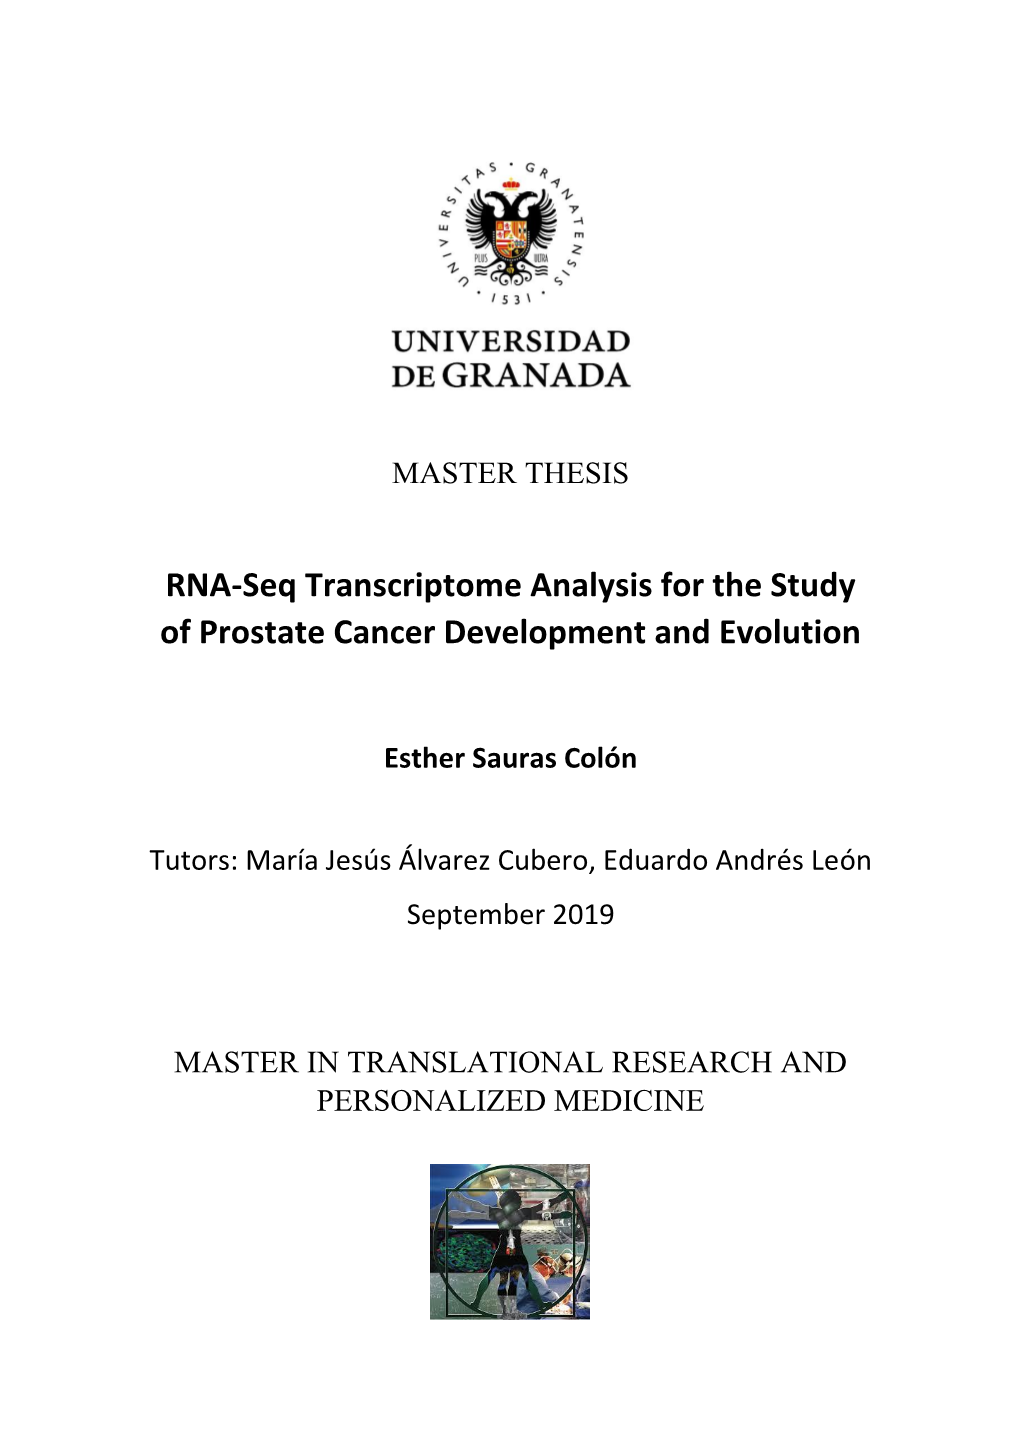 RNA-Seq Transcriptome Analysis for the Study of Prostate Cancer Development and Evolution